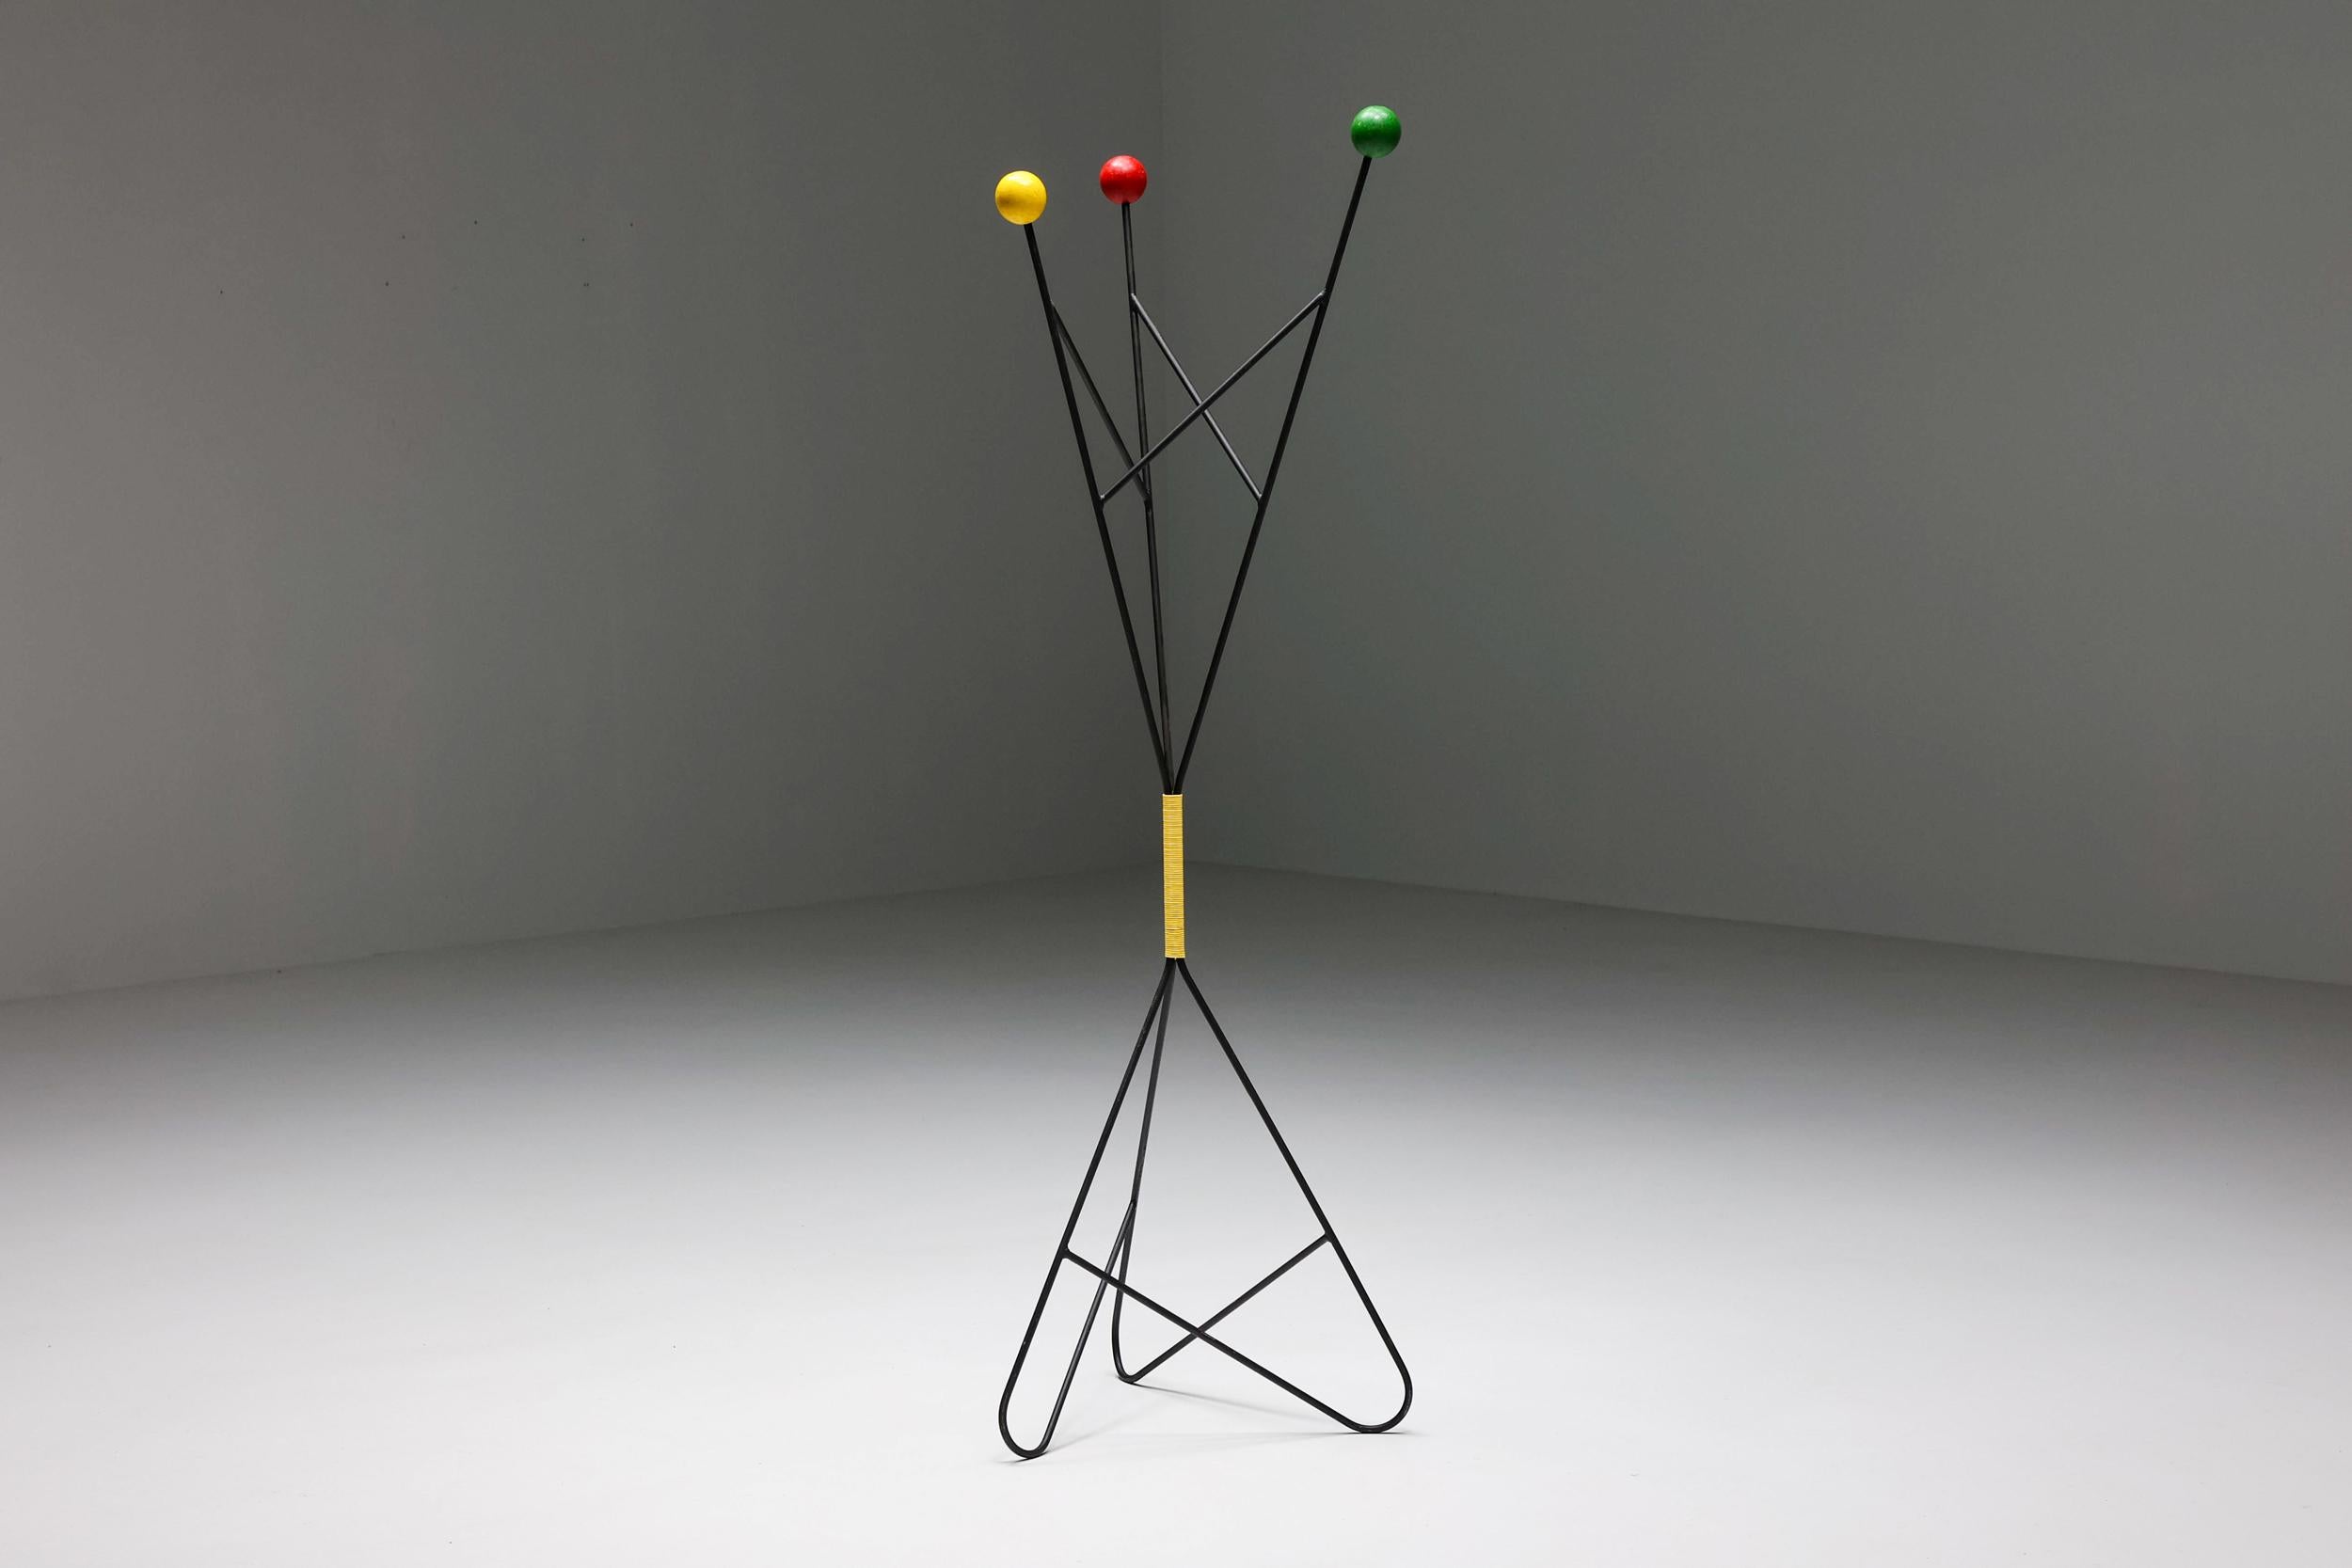 French mid-century coat rack by Roger Feraud for GEO. Made of black iron with colorful spheres as coat hooks. A functional and vibrant piece that brightens up the space.